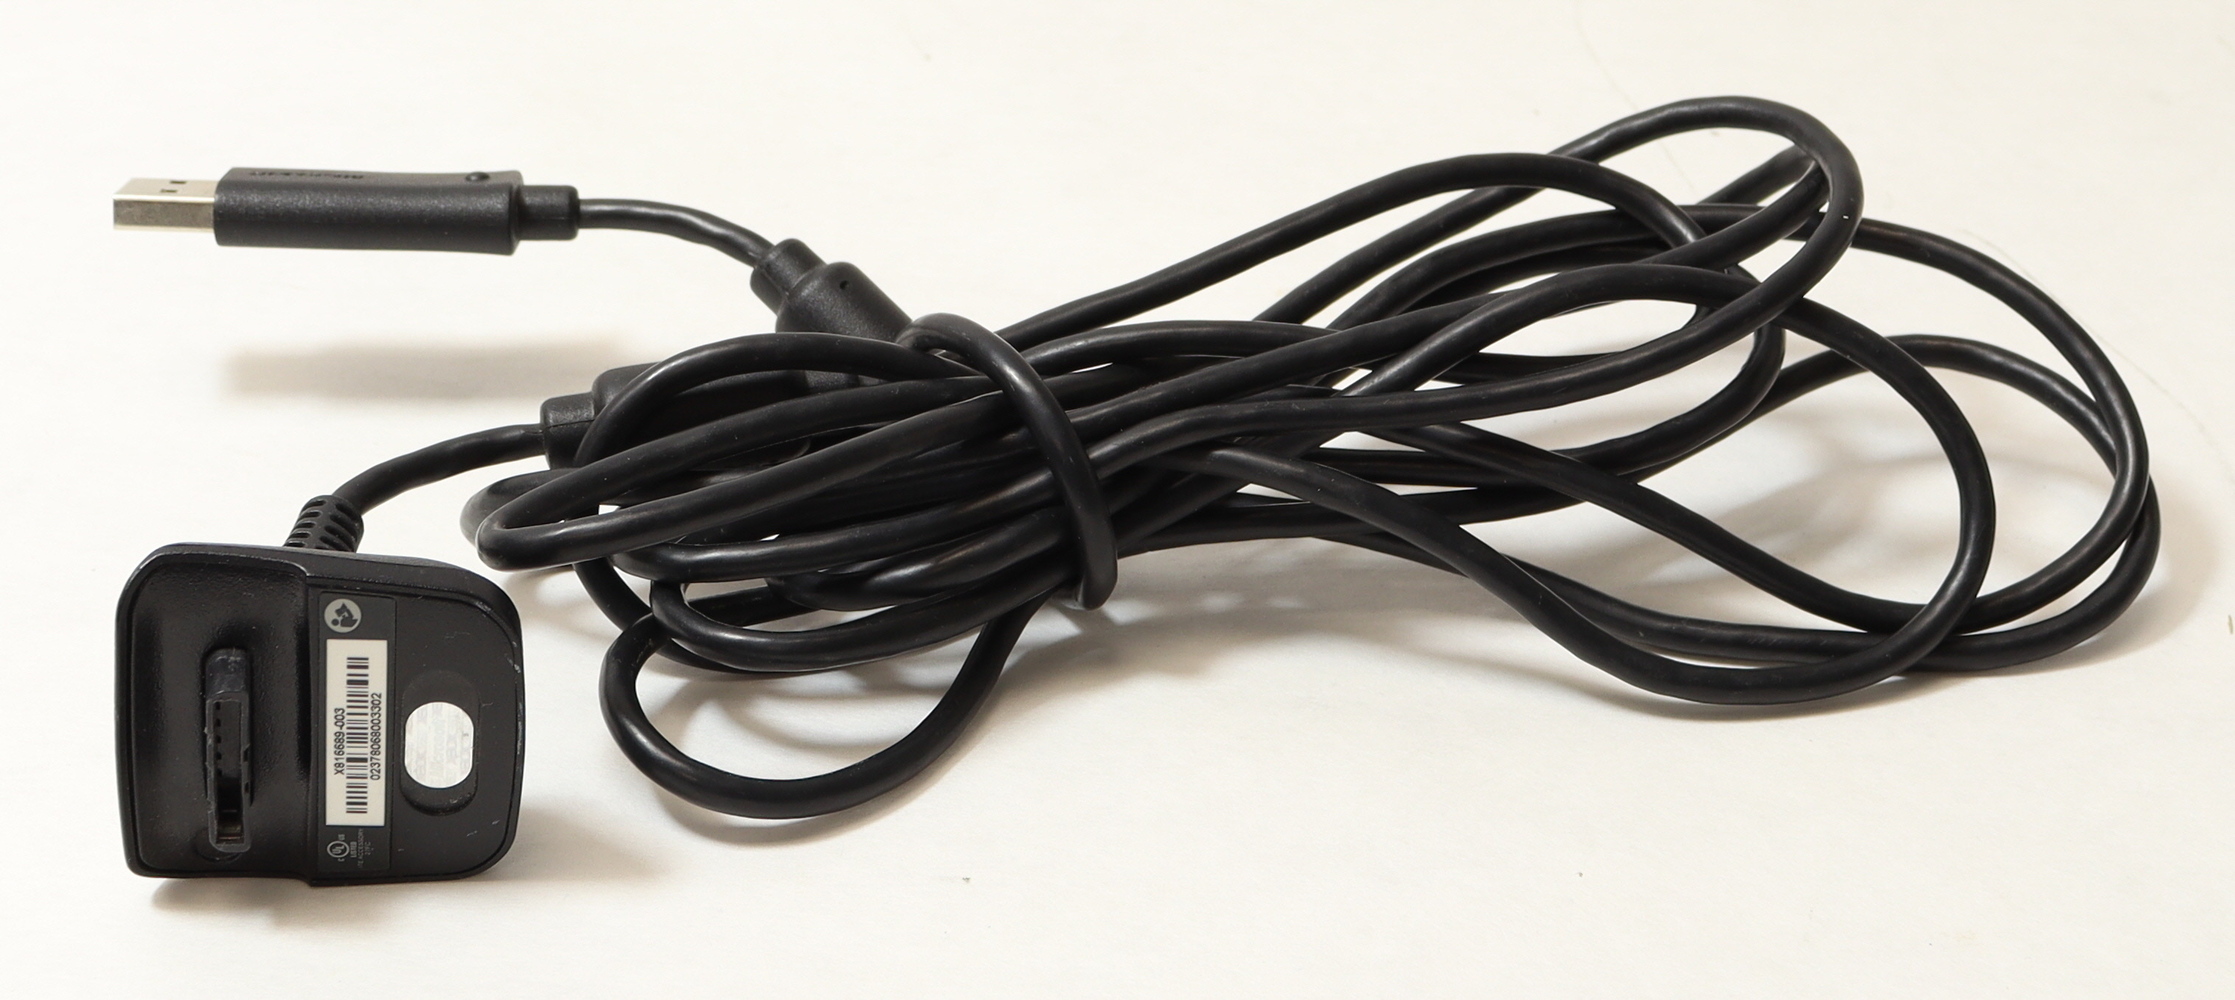 xbox 360 controller cable/kinect cords